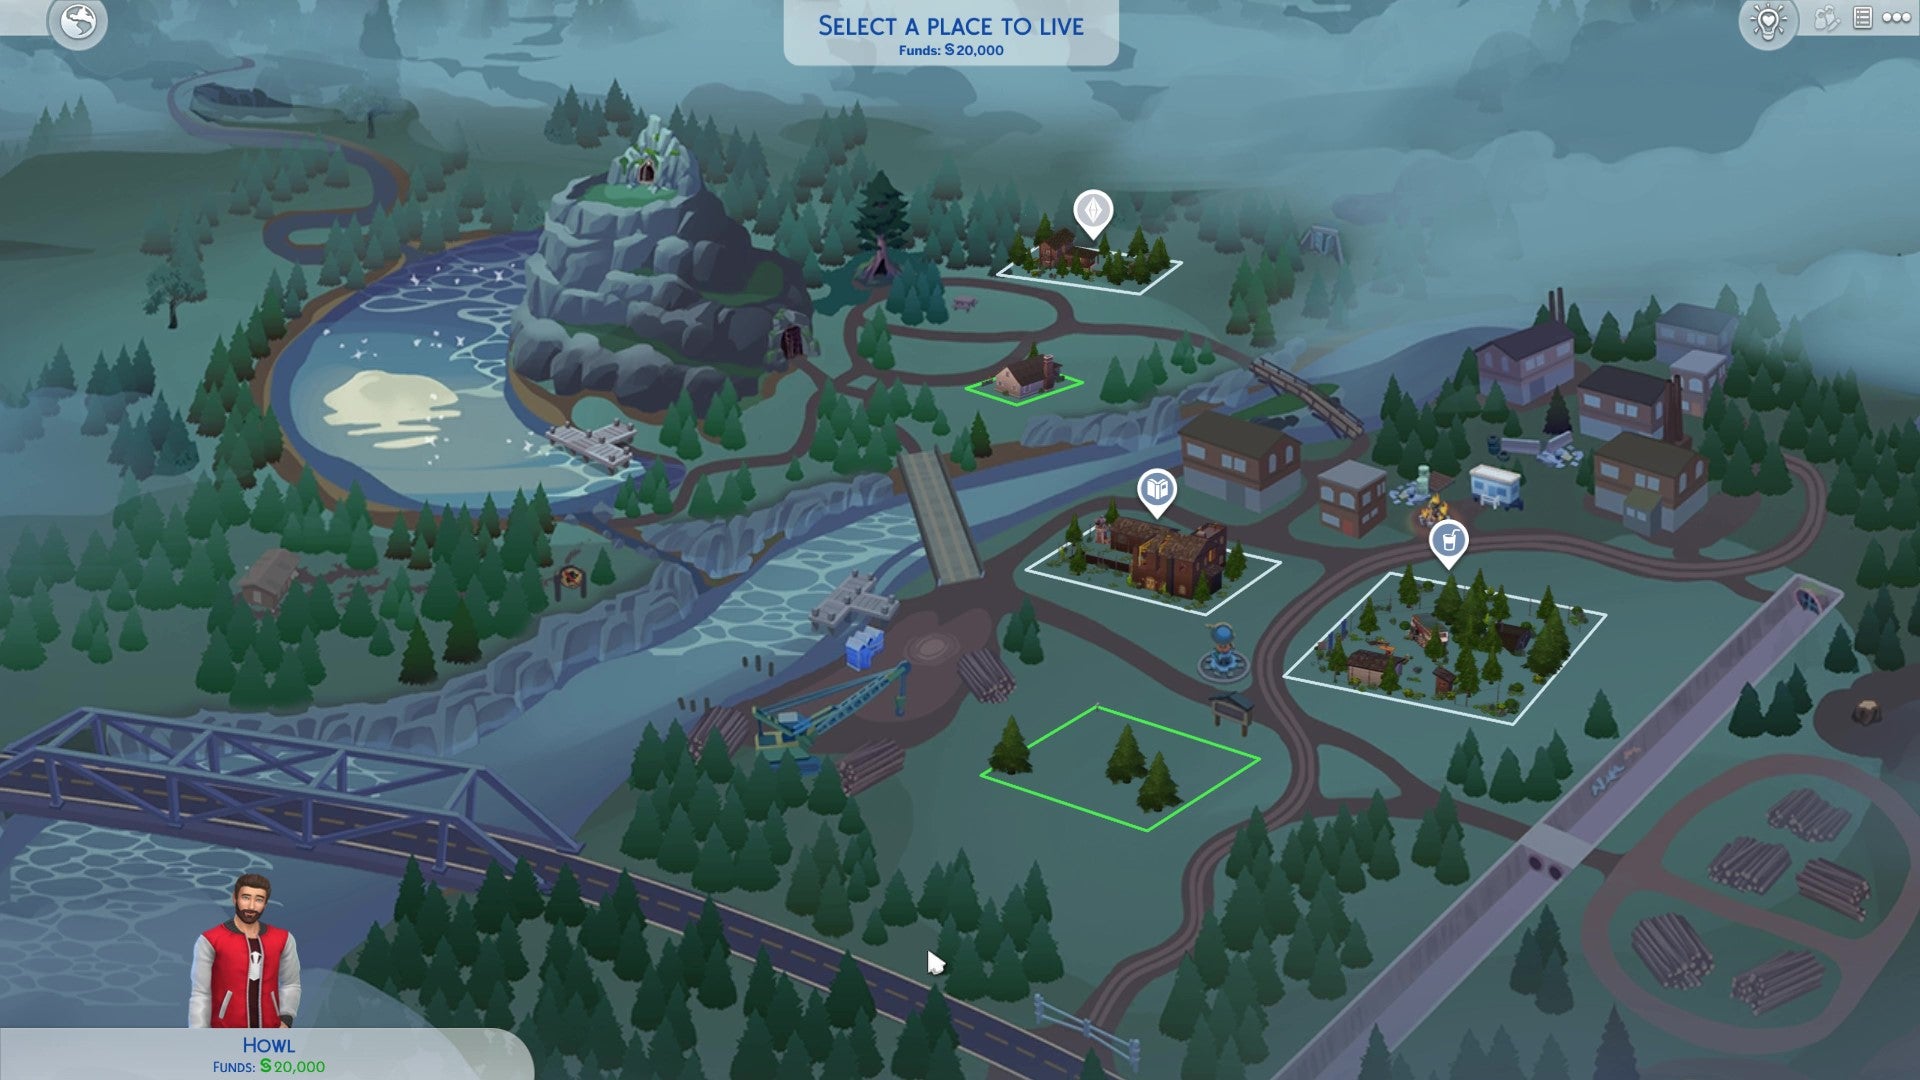 The world map view of Moonwood Mill from The Sims 4: Werewolves.